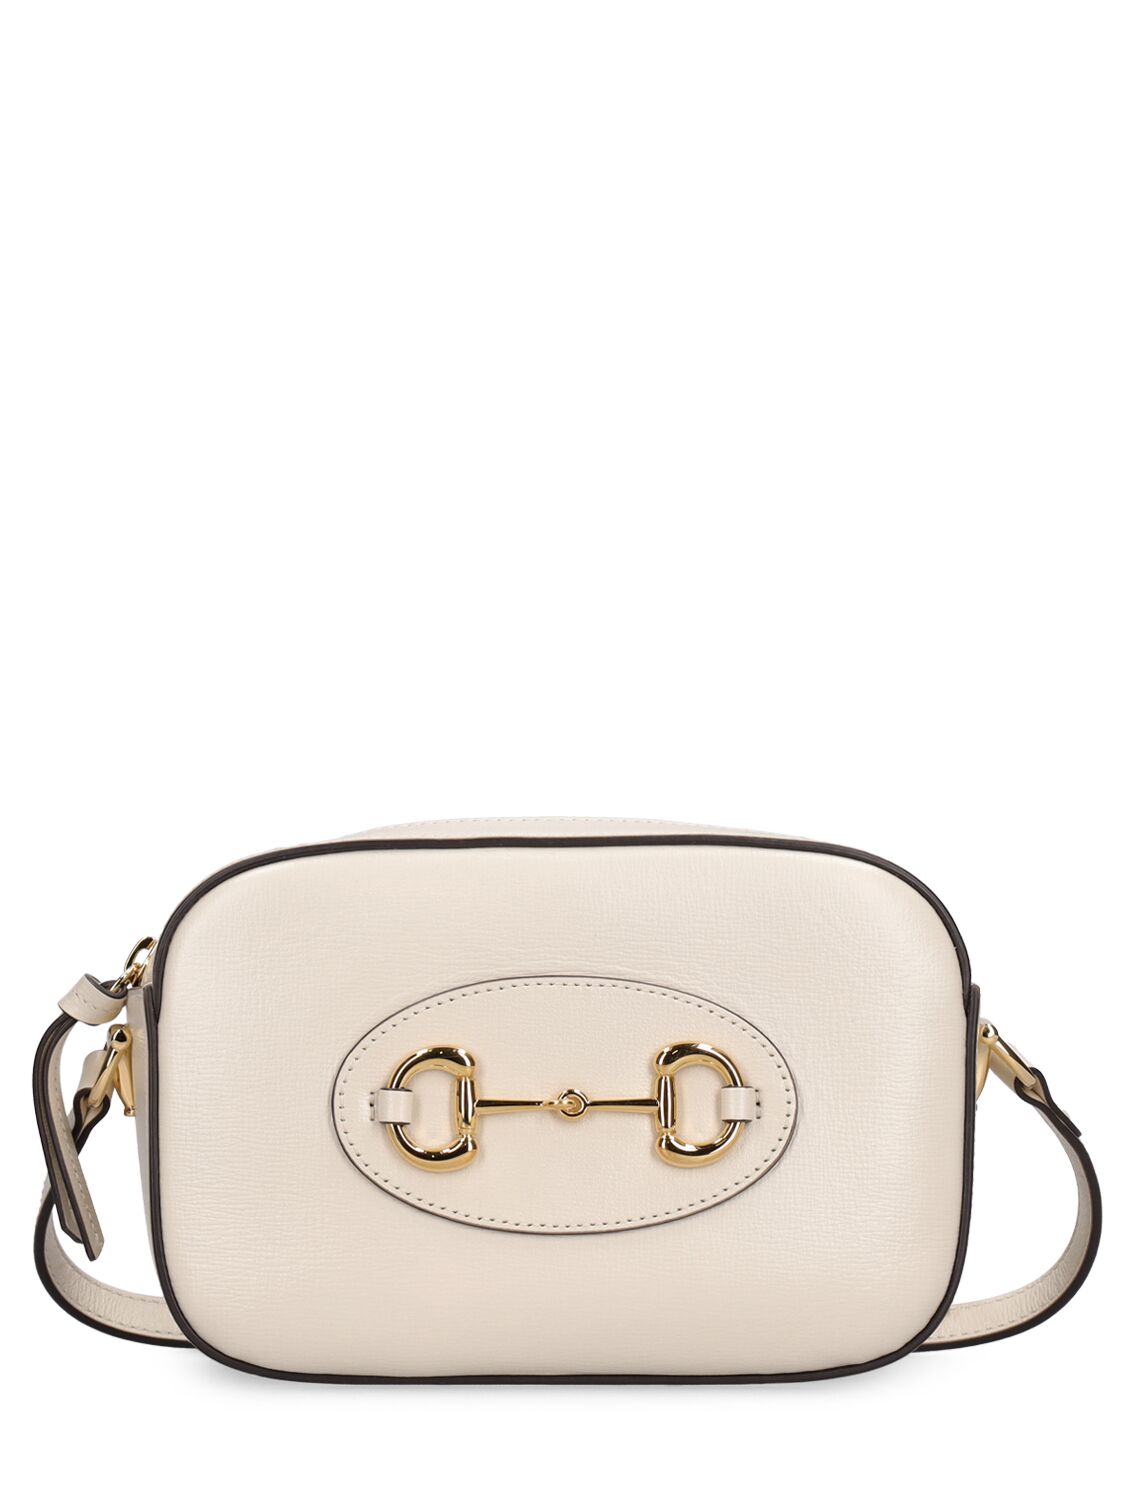 Gucci Small 1955 Horsebit Leather Shoulder Bag In Mystic White